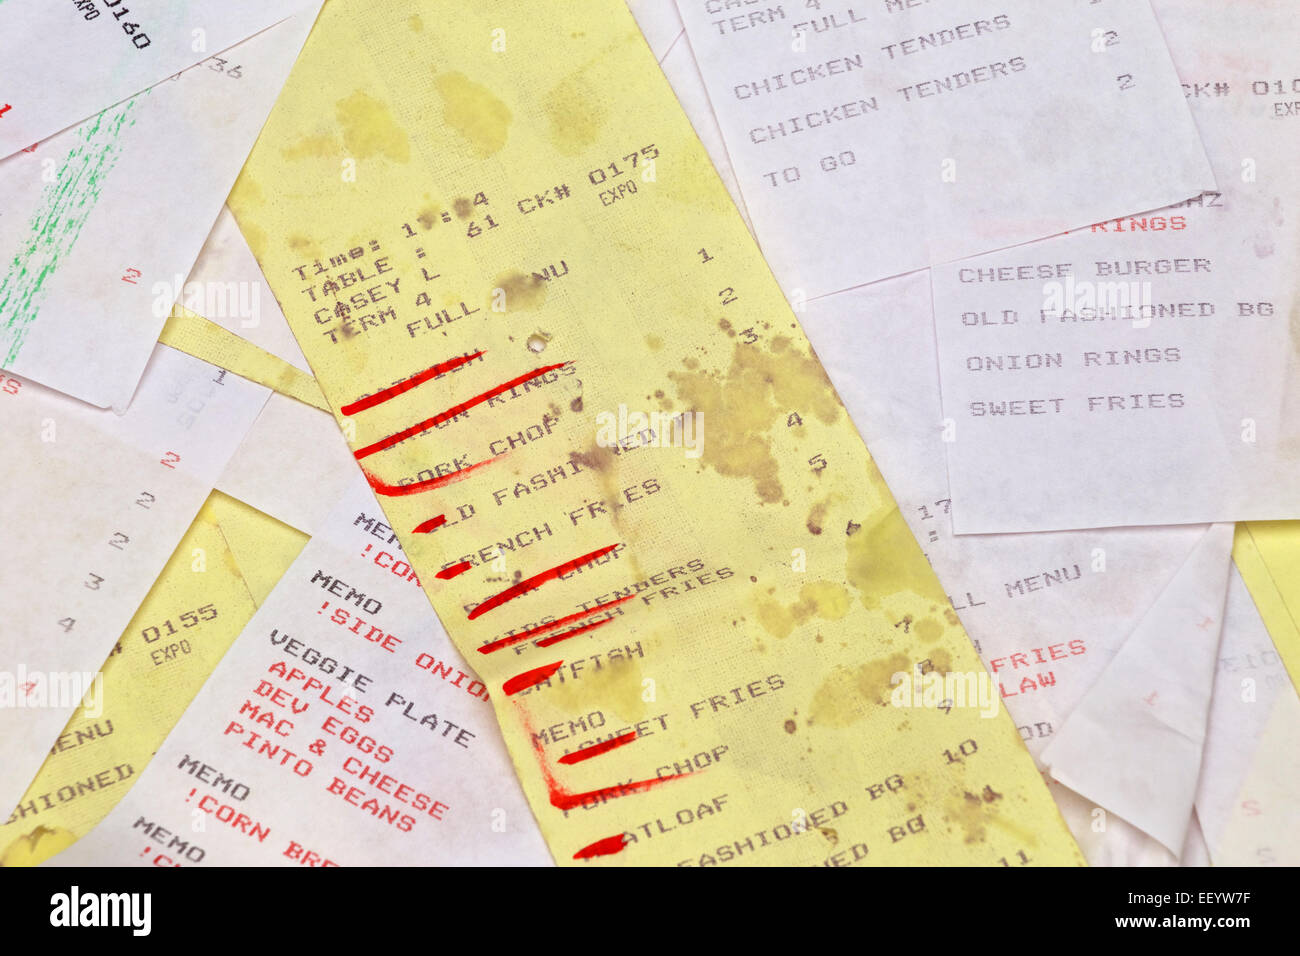 Yellow grease stained restaurant order ticket with items crossed off. Stock Photo